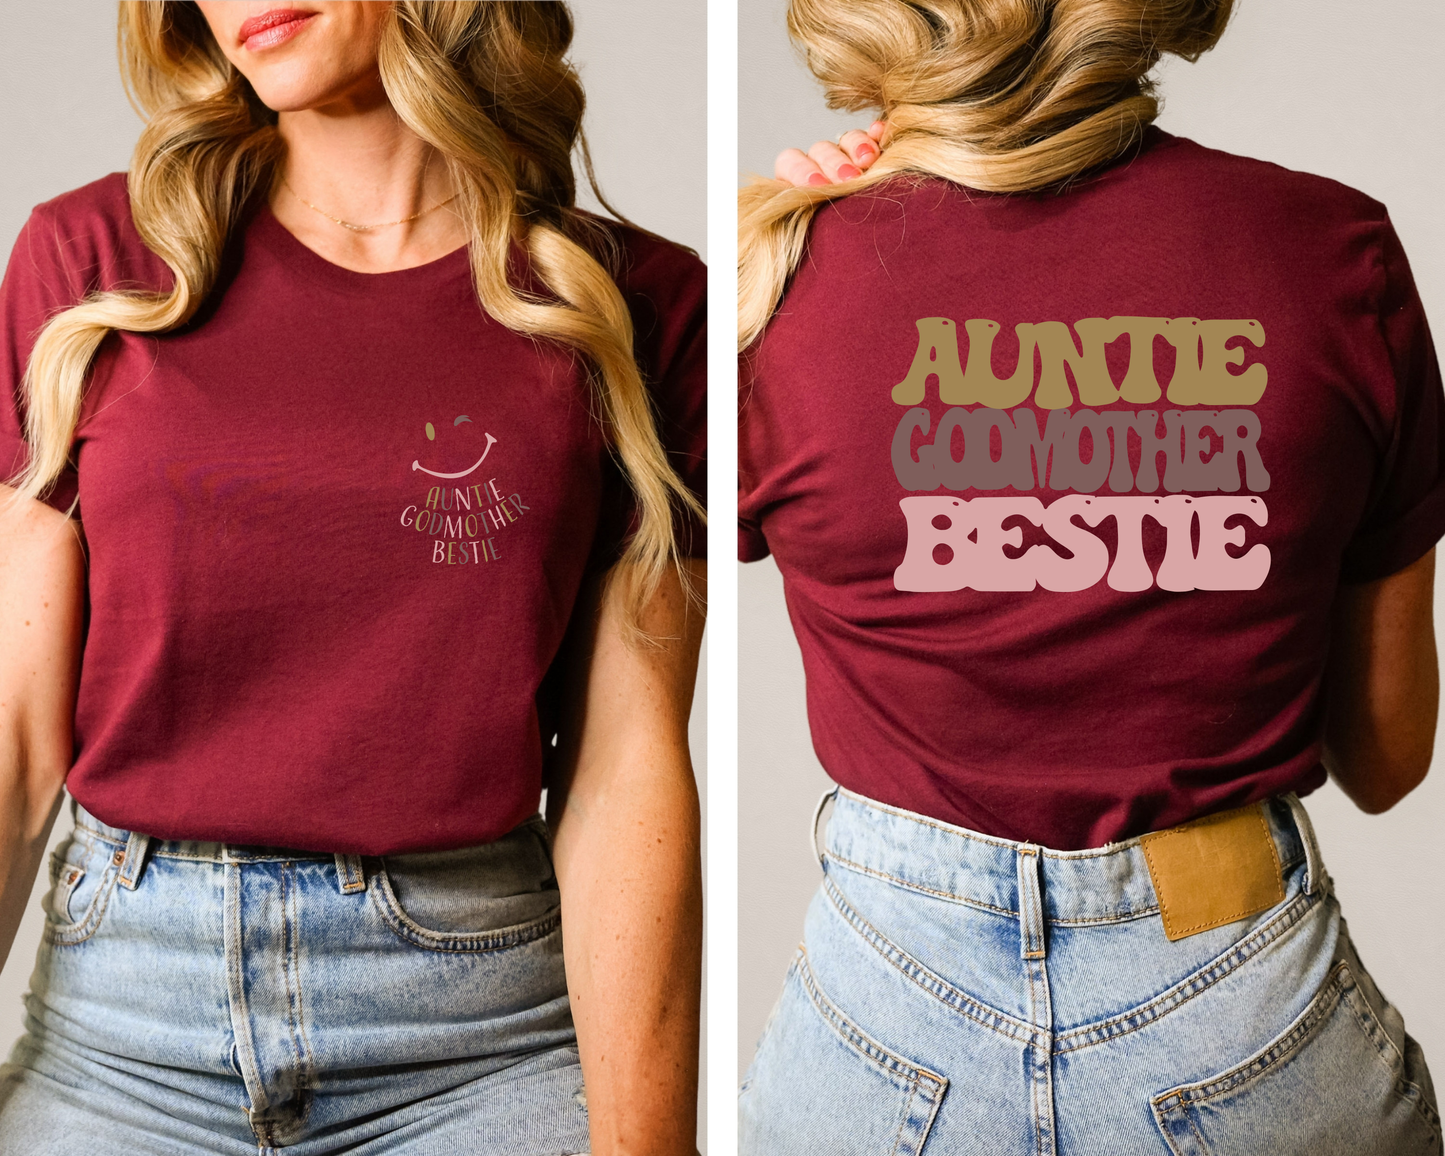 Auntie Godmother Bestie T-shirt: Celebrating the special bond of aunts, godmothers, and best friends.